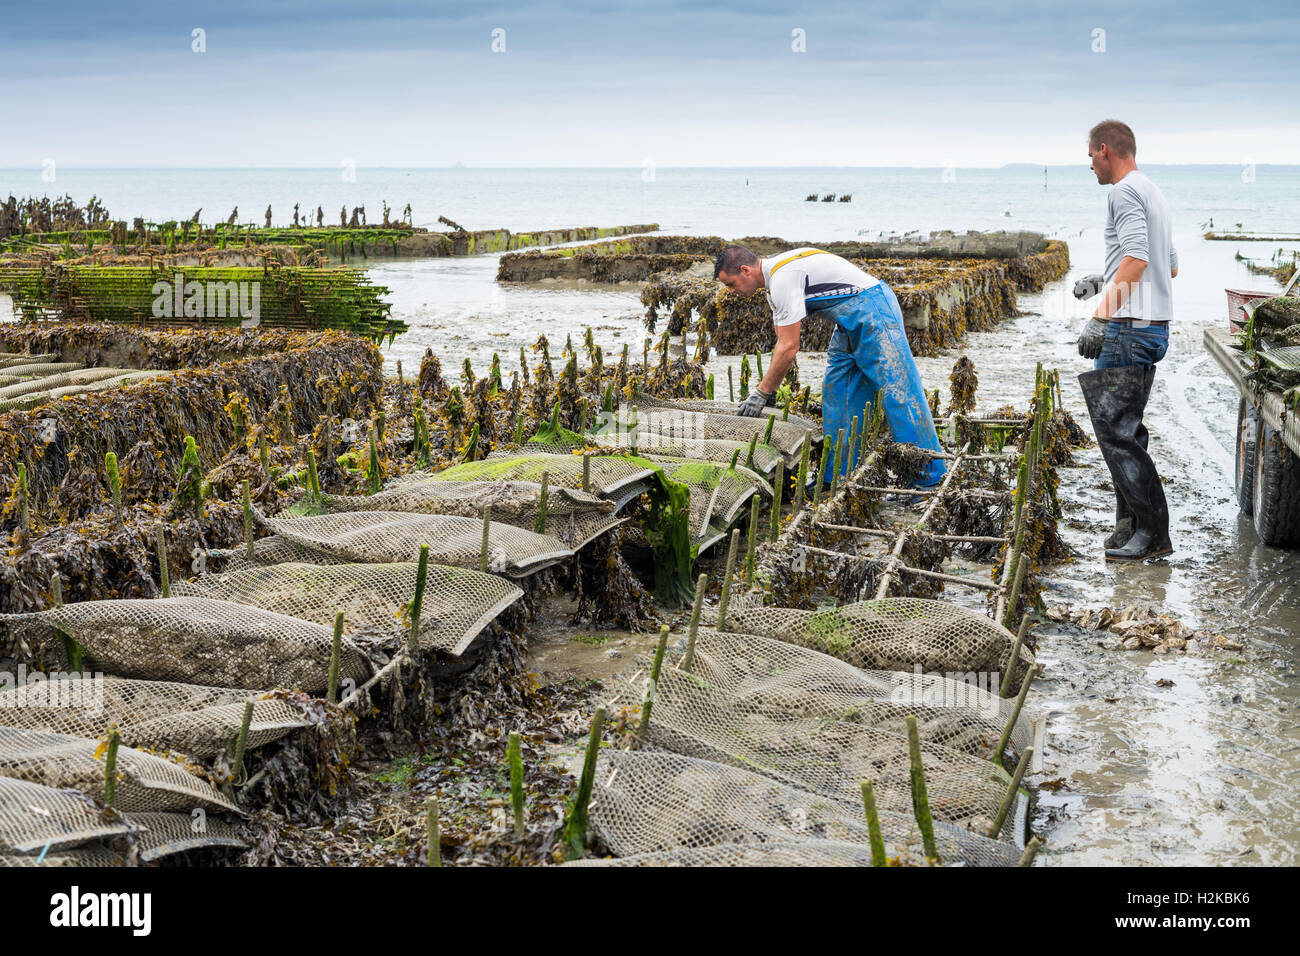 Oyster farmers, Cancale, Brittany, France, EU, Europe Stock Photo